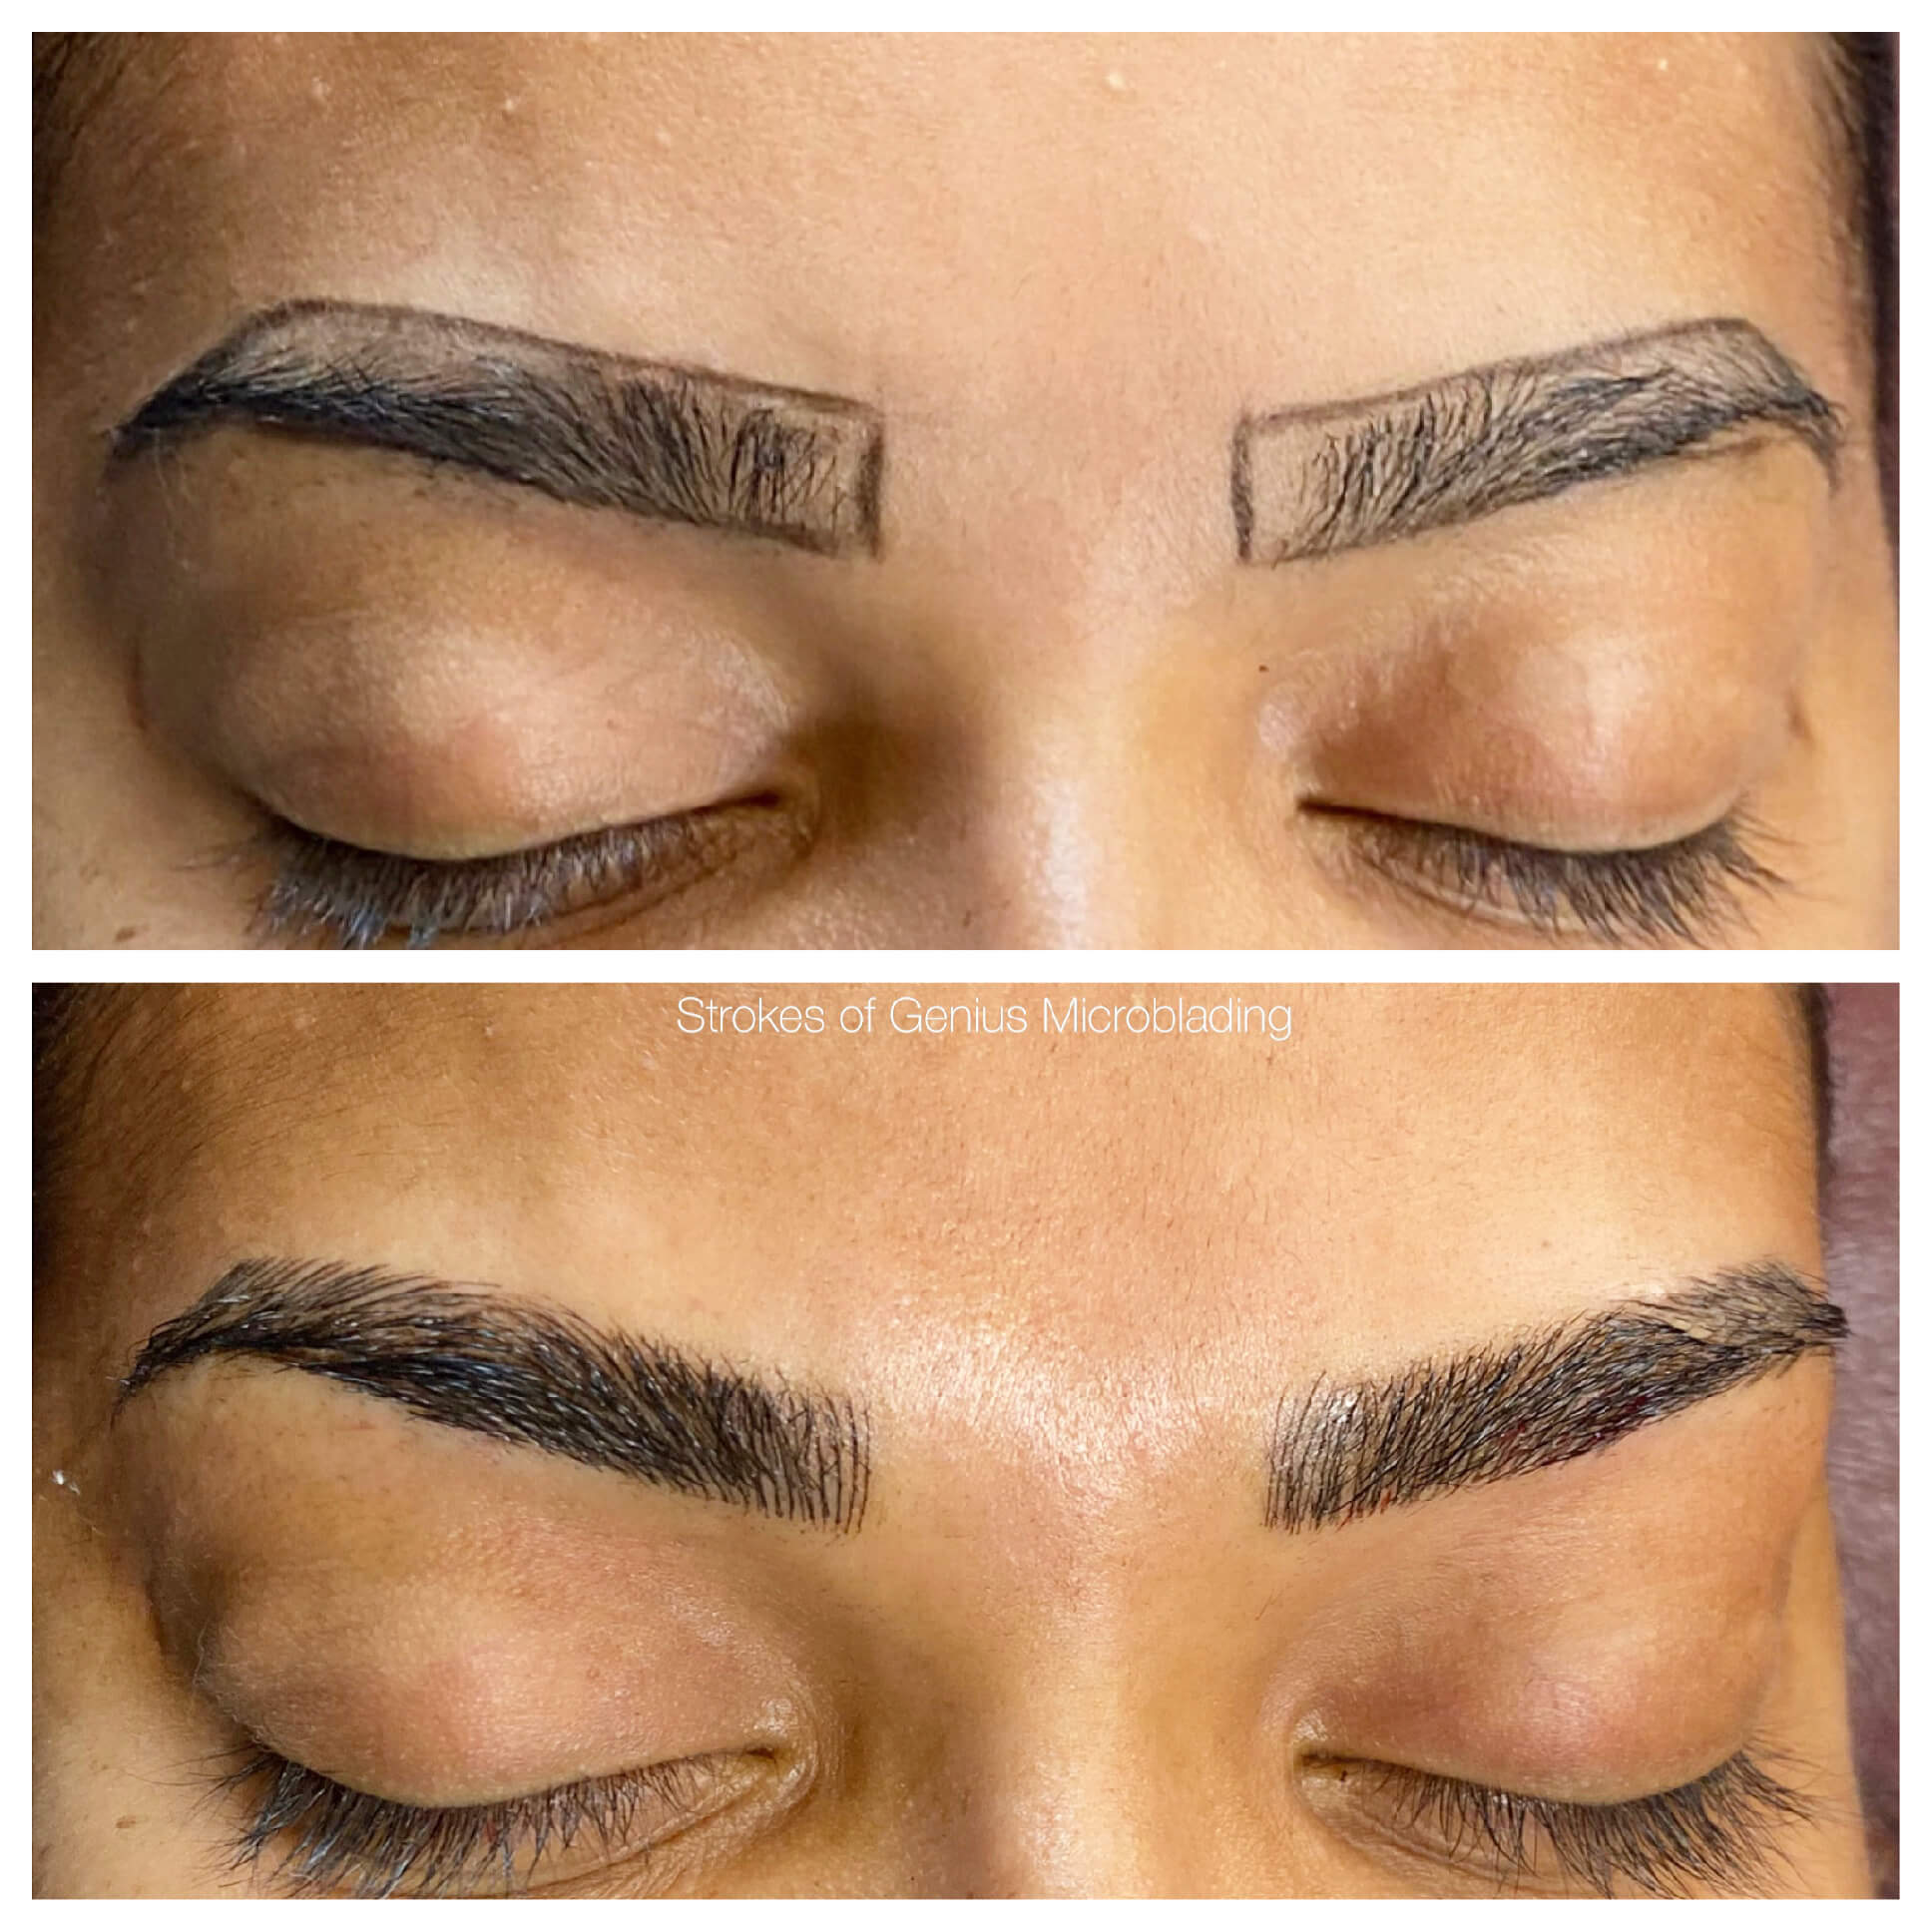 Does a Permanent Eyeliner Tattoo Make Your Eyes Look Bigger?